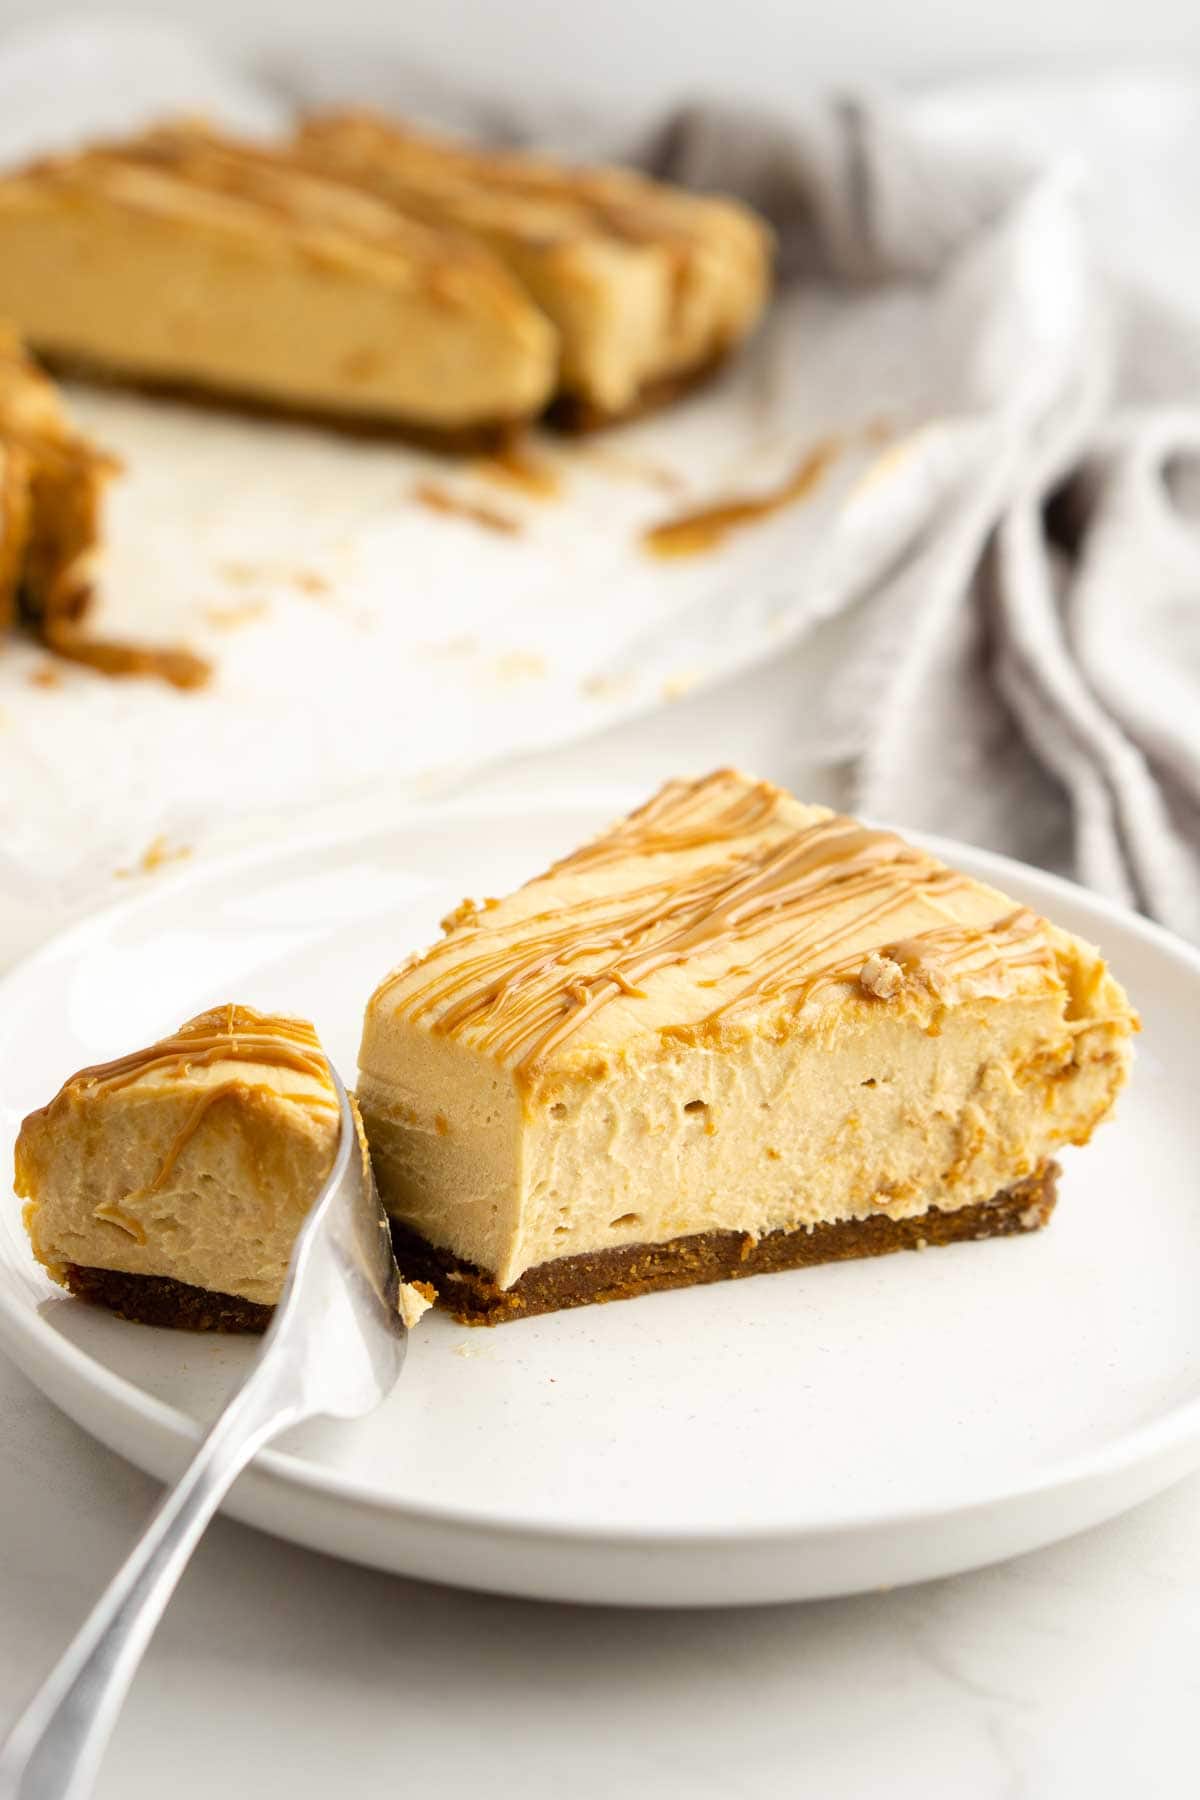 Slice of biscoff cheesecake with bite taken